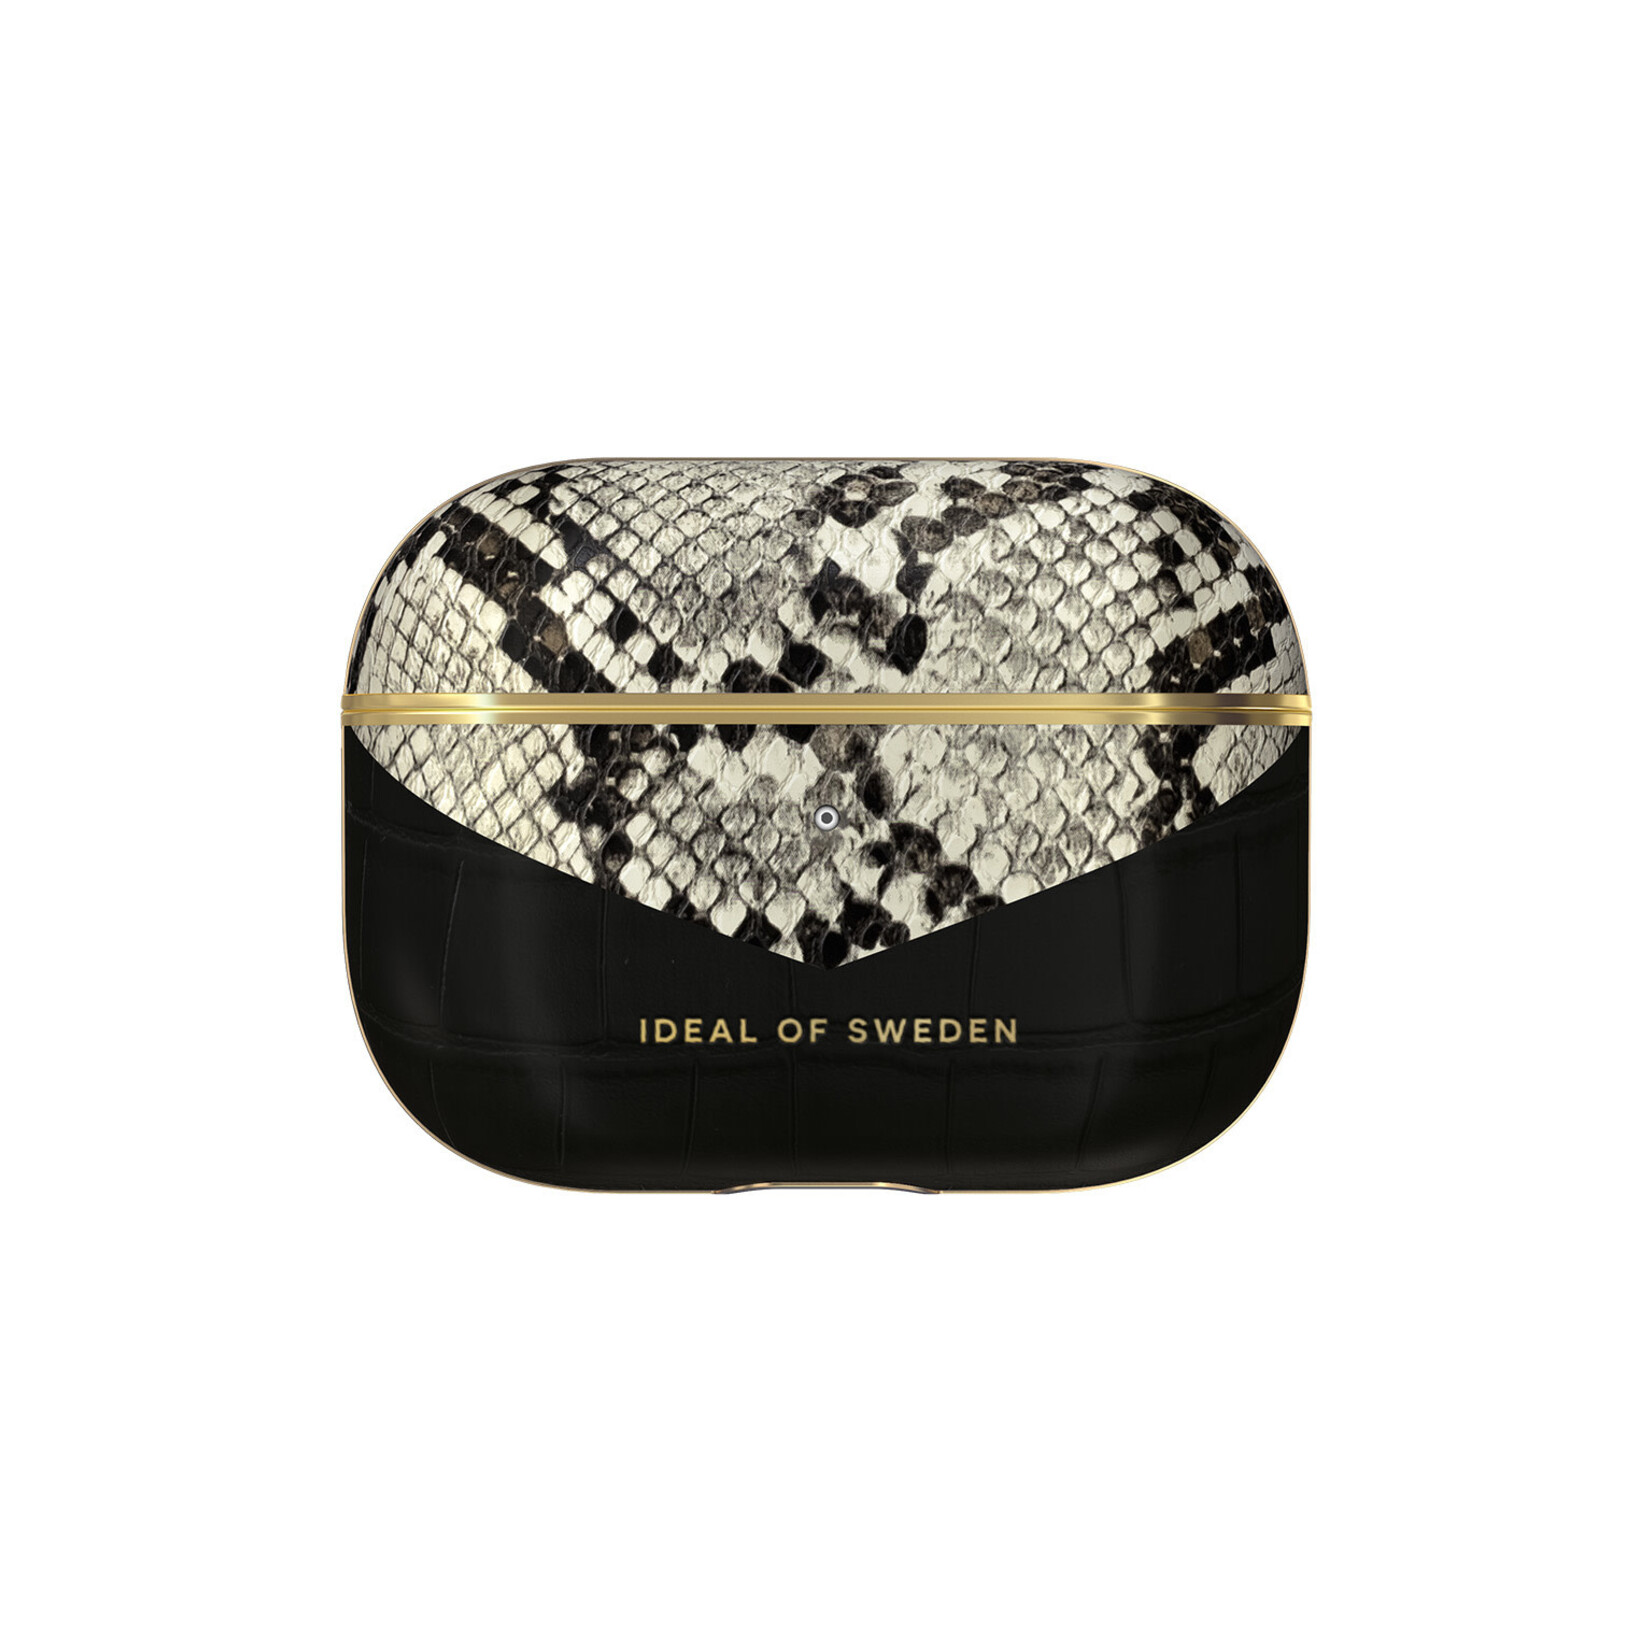 iDeal of Sweden iDeal of Sweden AirPods Pro hoesje - Midnight Python